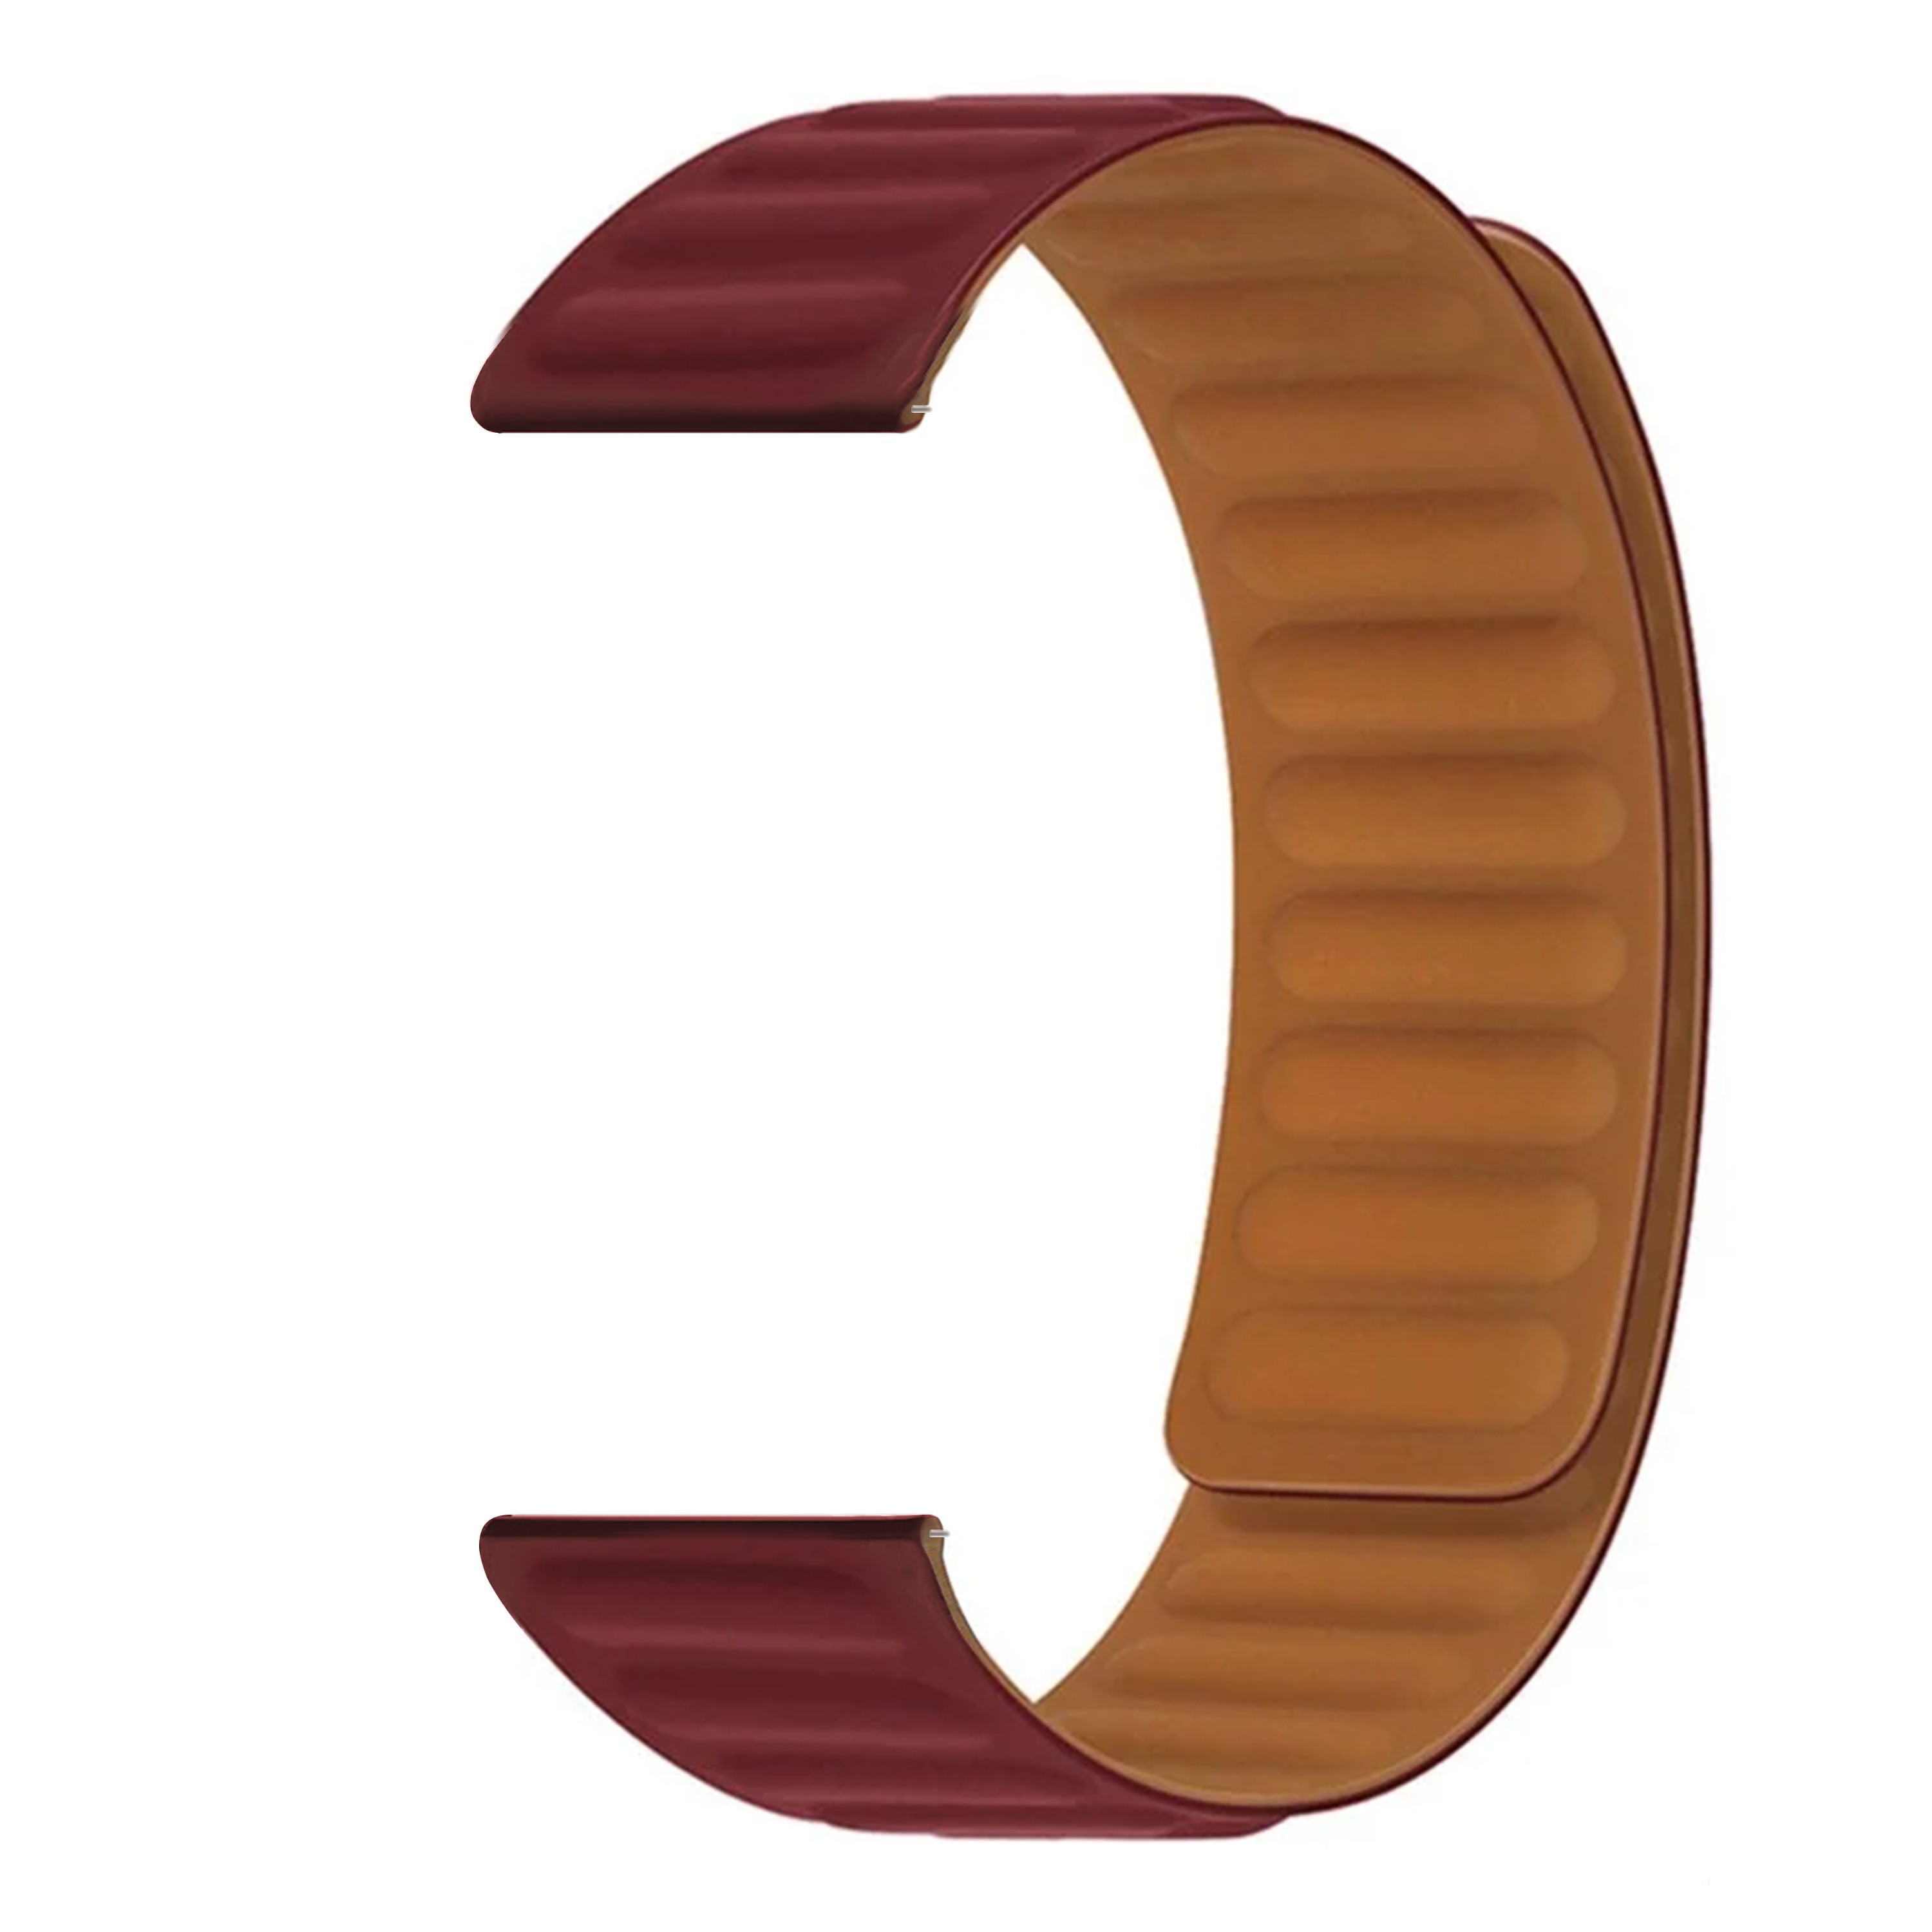 Hama Fit Watch 4910 Magnetic Silicone Band Burgundy